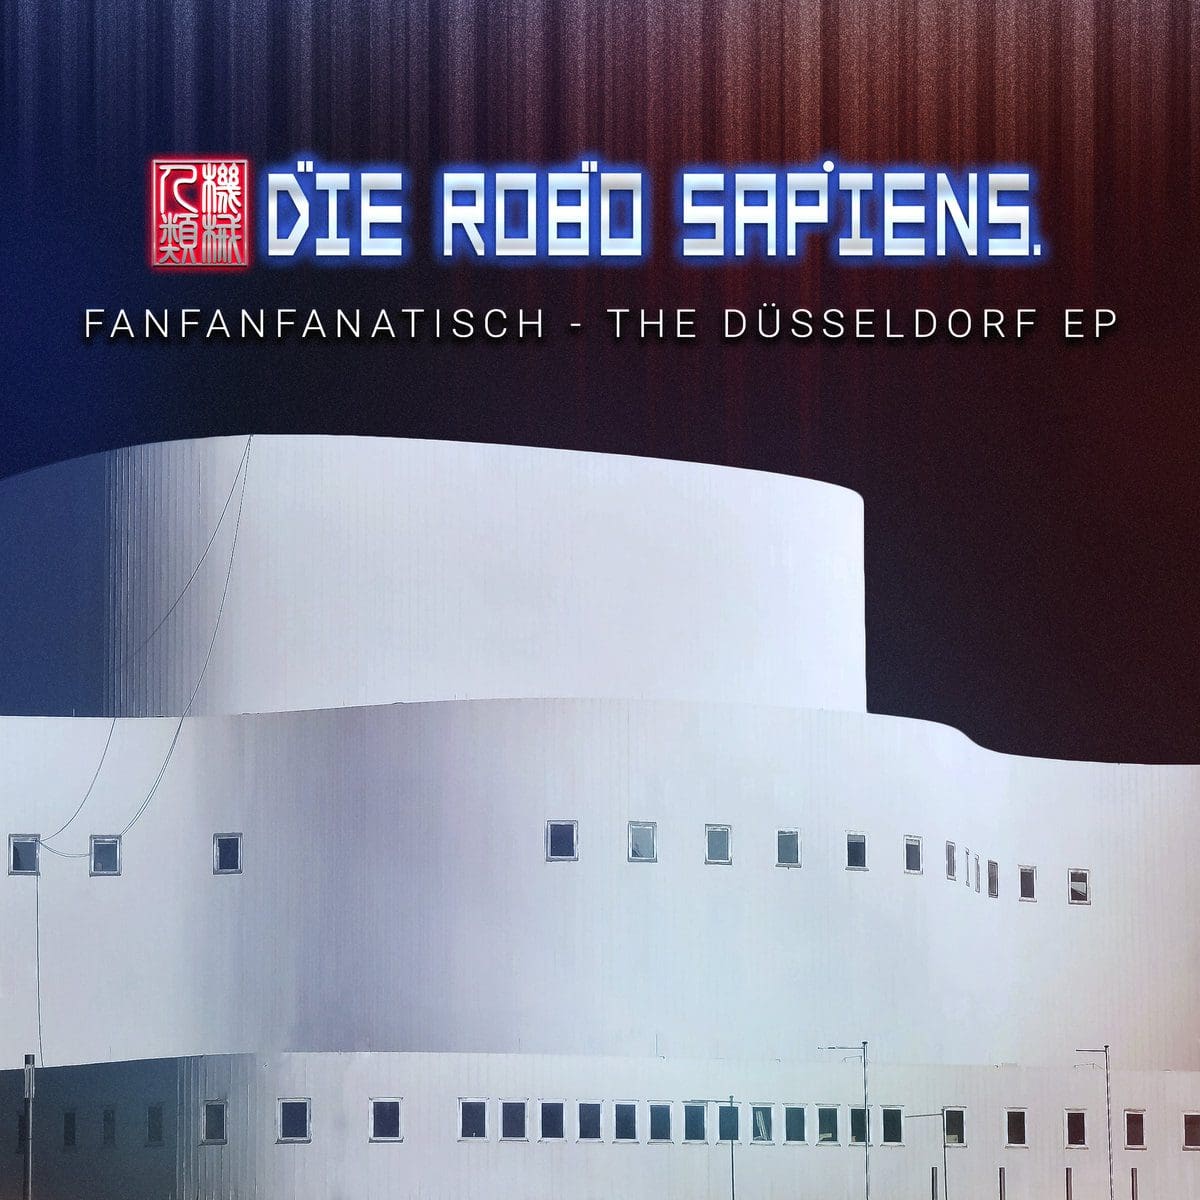 Juergen Engler EBM-project Die Robo Sapiens launches 'FanFanFanatisch - The Düsseldorf EP' - 7-track EP available now exclusively via Bandcamp